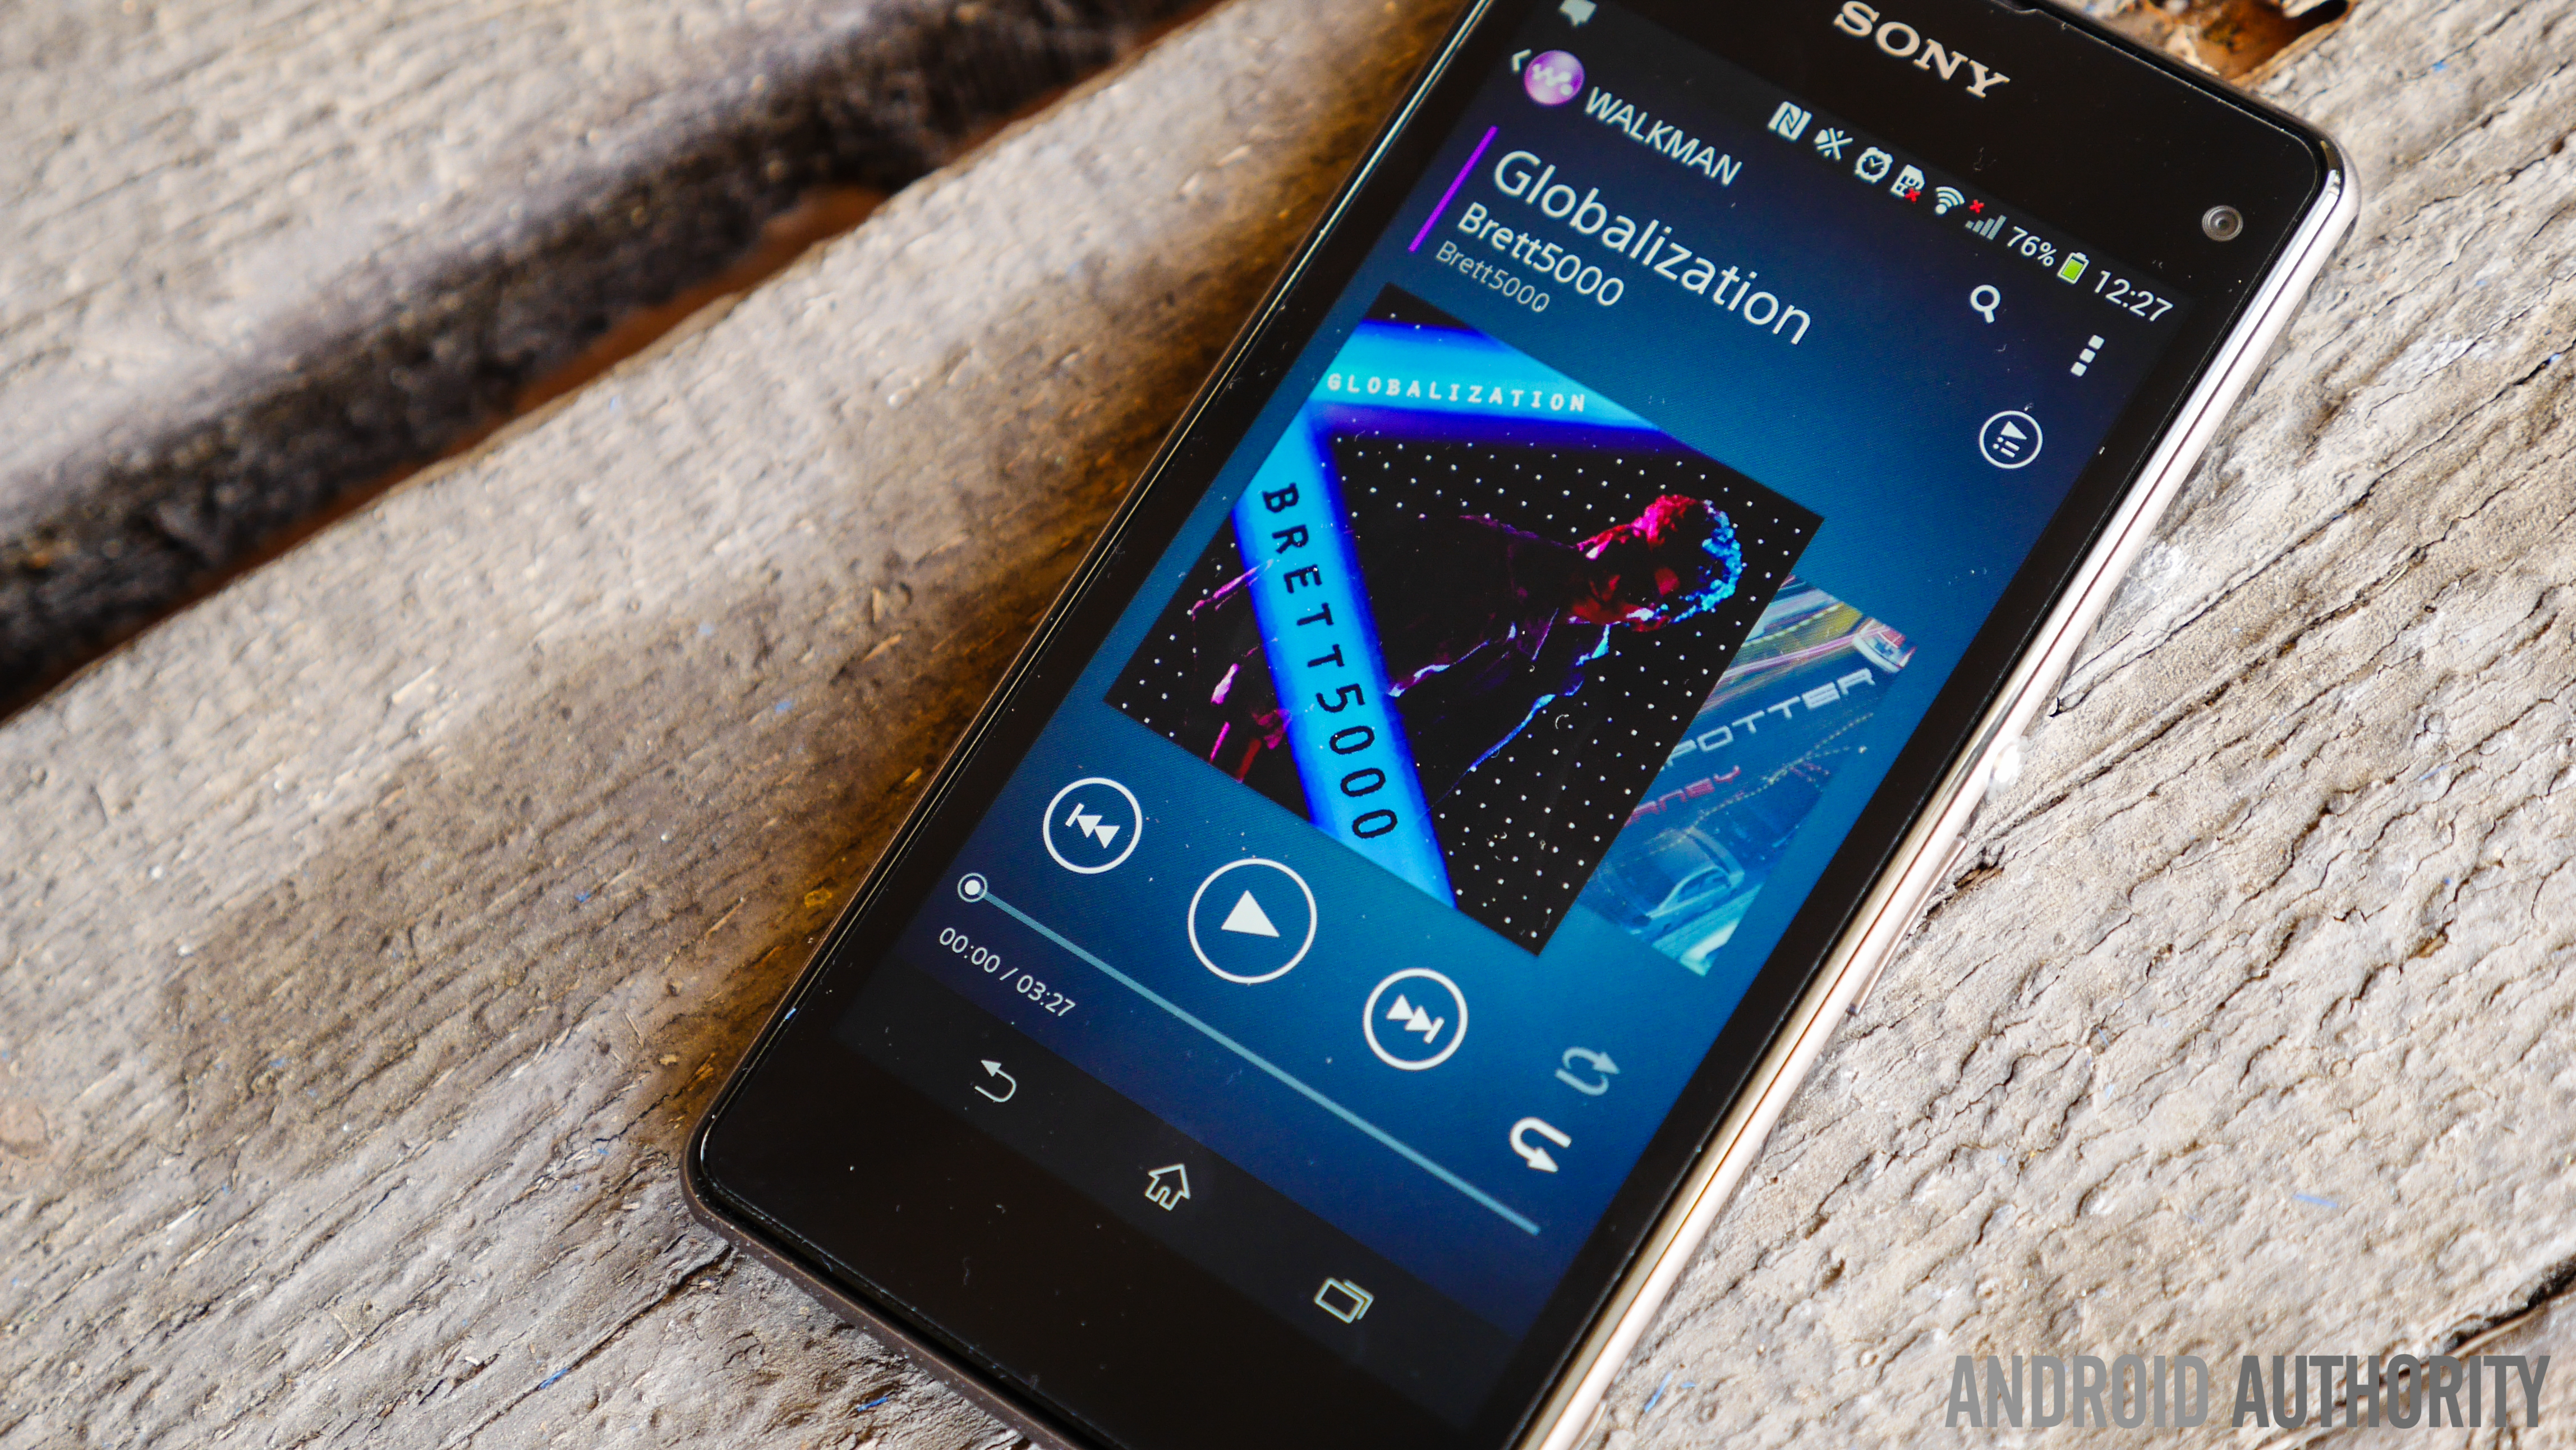 Meyella buiten gebruik Verslaving Sony Xperia Z1 Compact Review - Android Authority